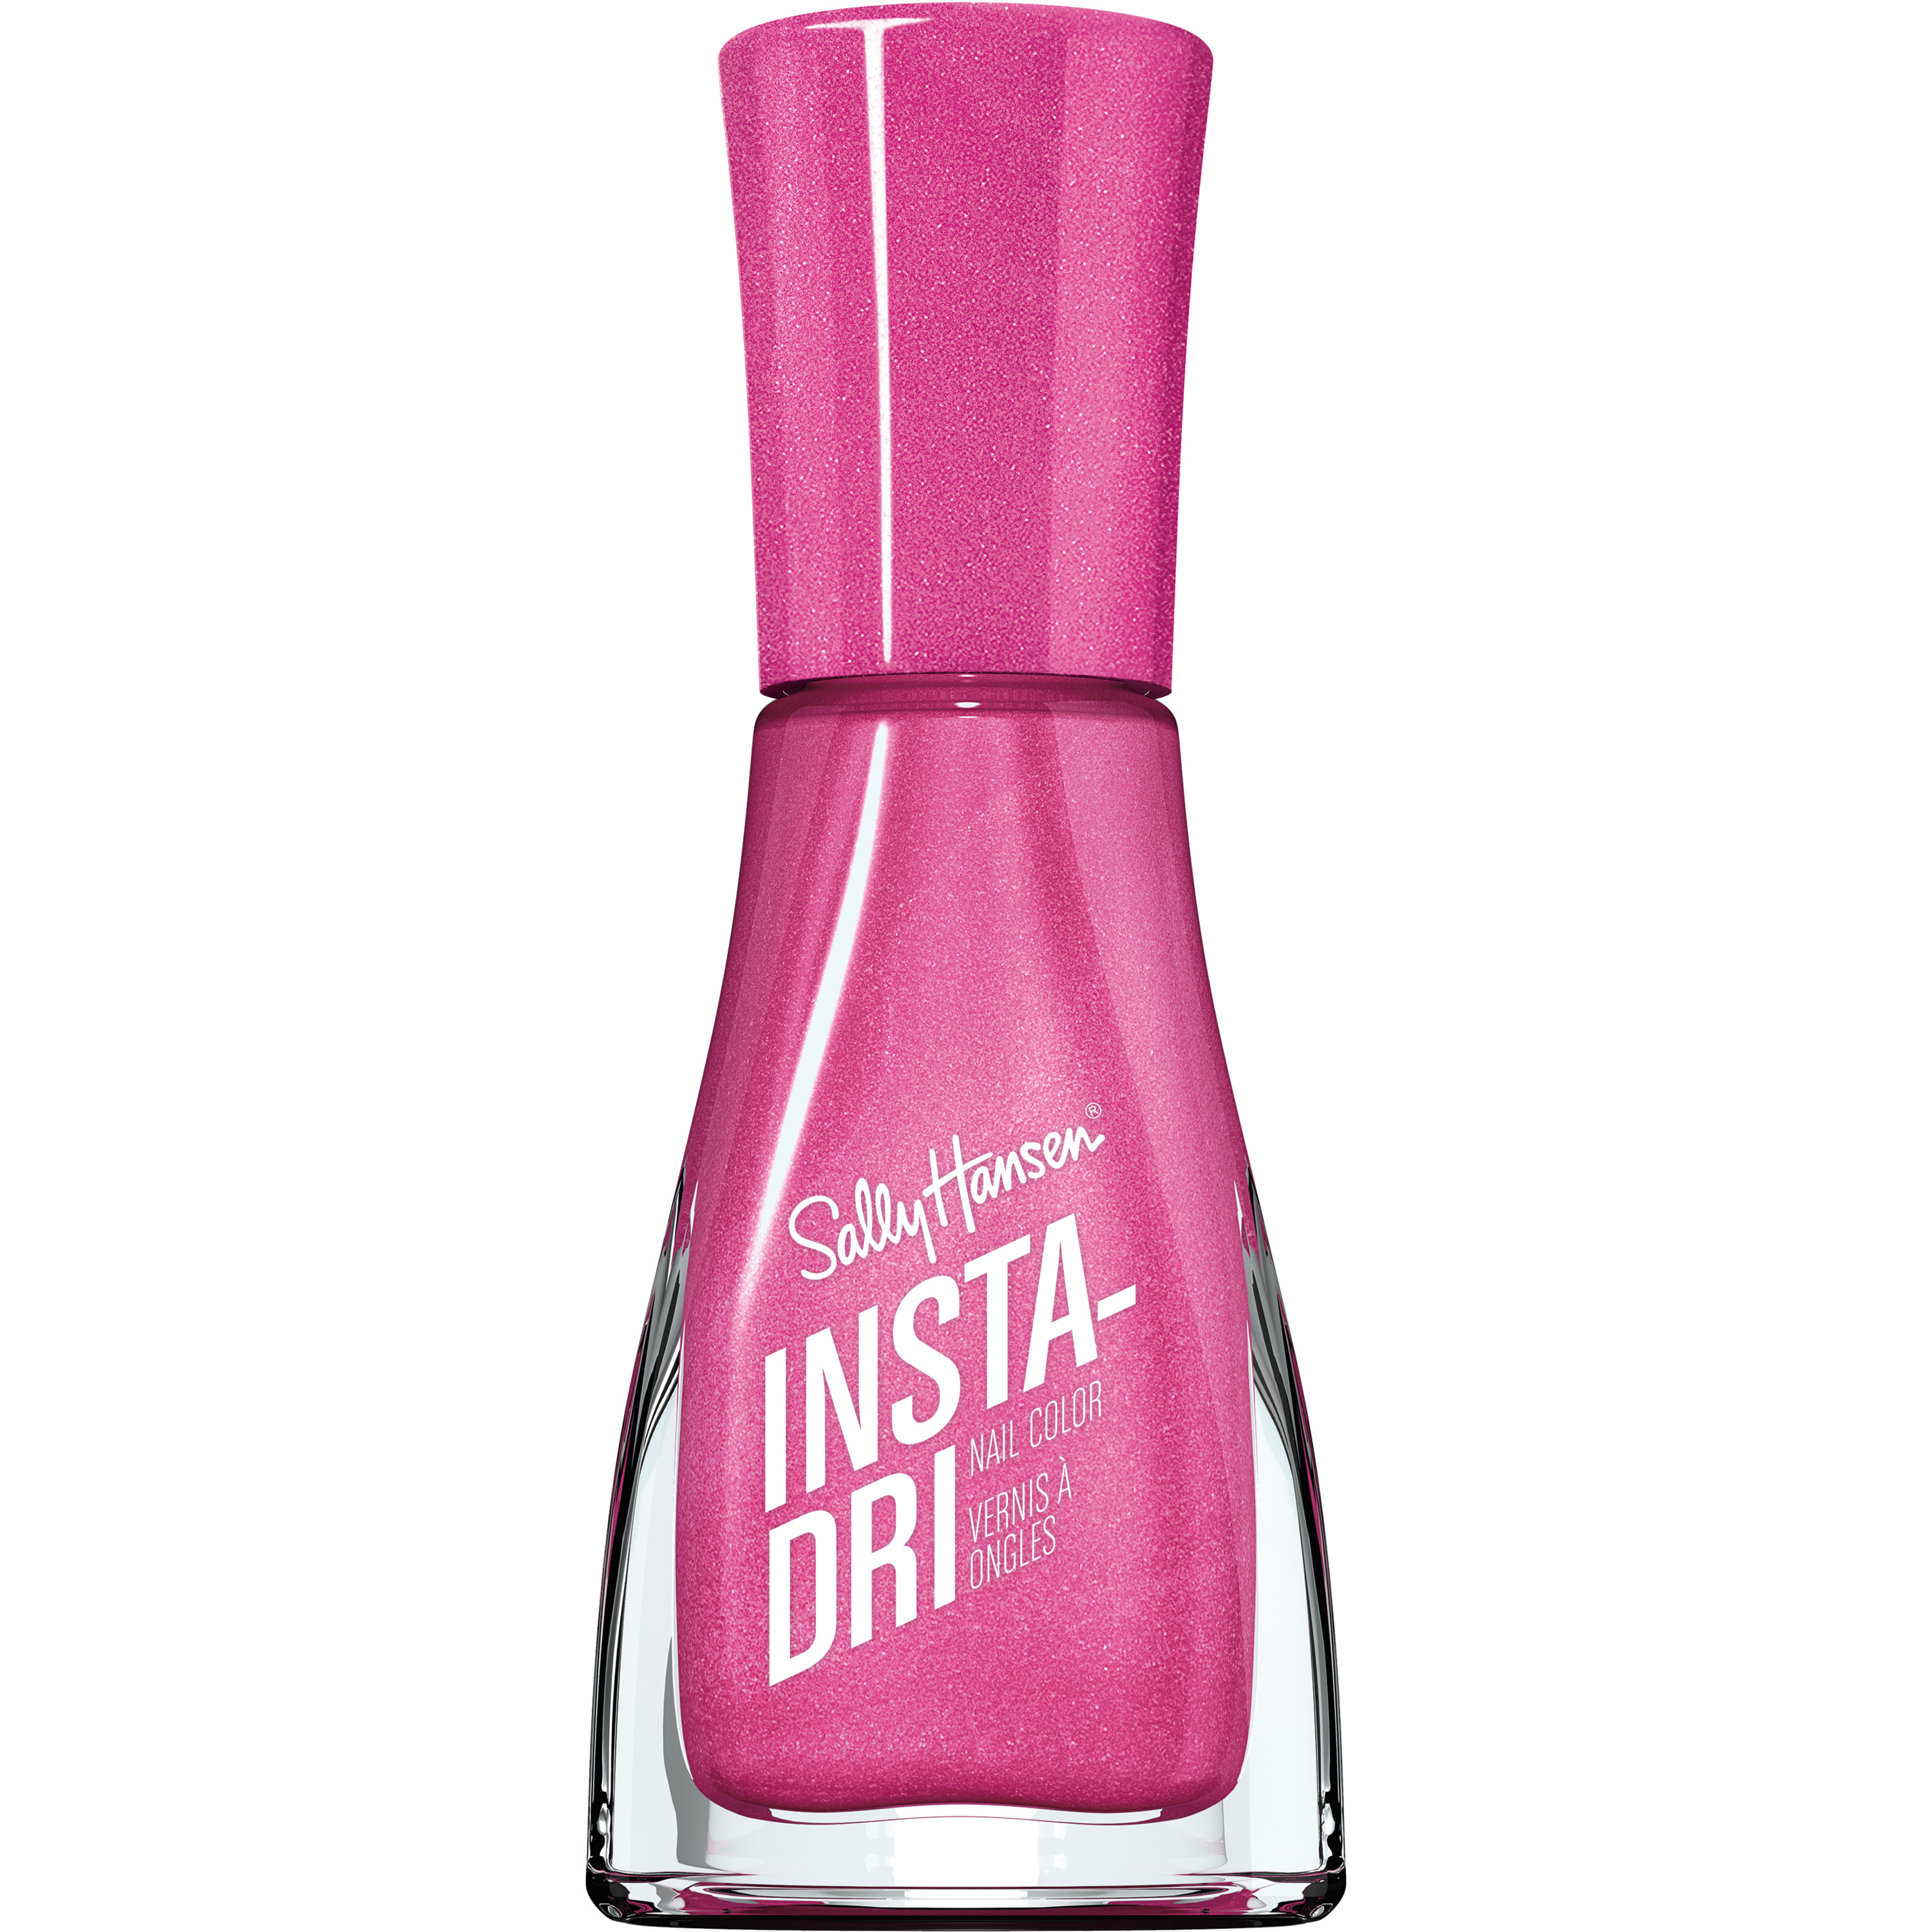 Sally Hansen Insta-Dri Nail Color, Pumped Up Pink, 3-in-1 Formula, Color Nail Polish, 0.31 Oz, Quick Dry Nail Polish, Nail Polish, Top Coat Nails, Full Coverage Formula, One Stroke, One Coat - image 1 of 14